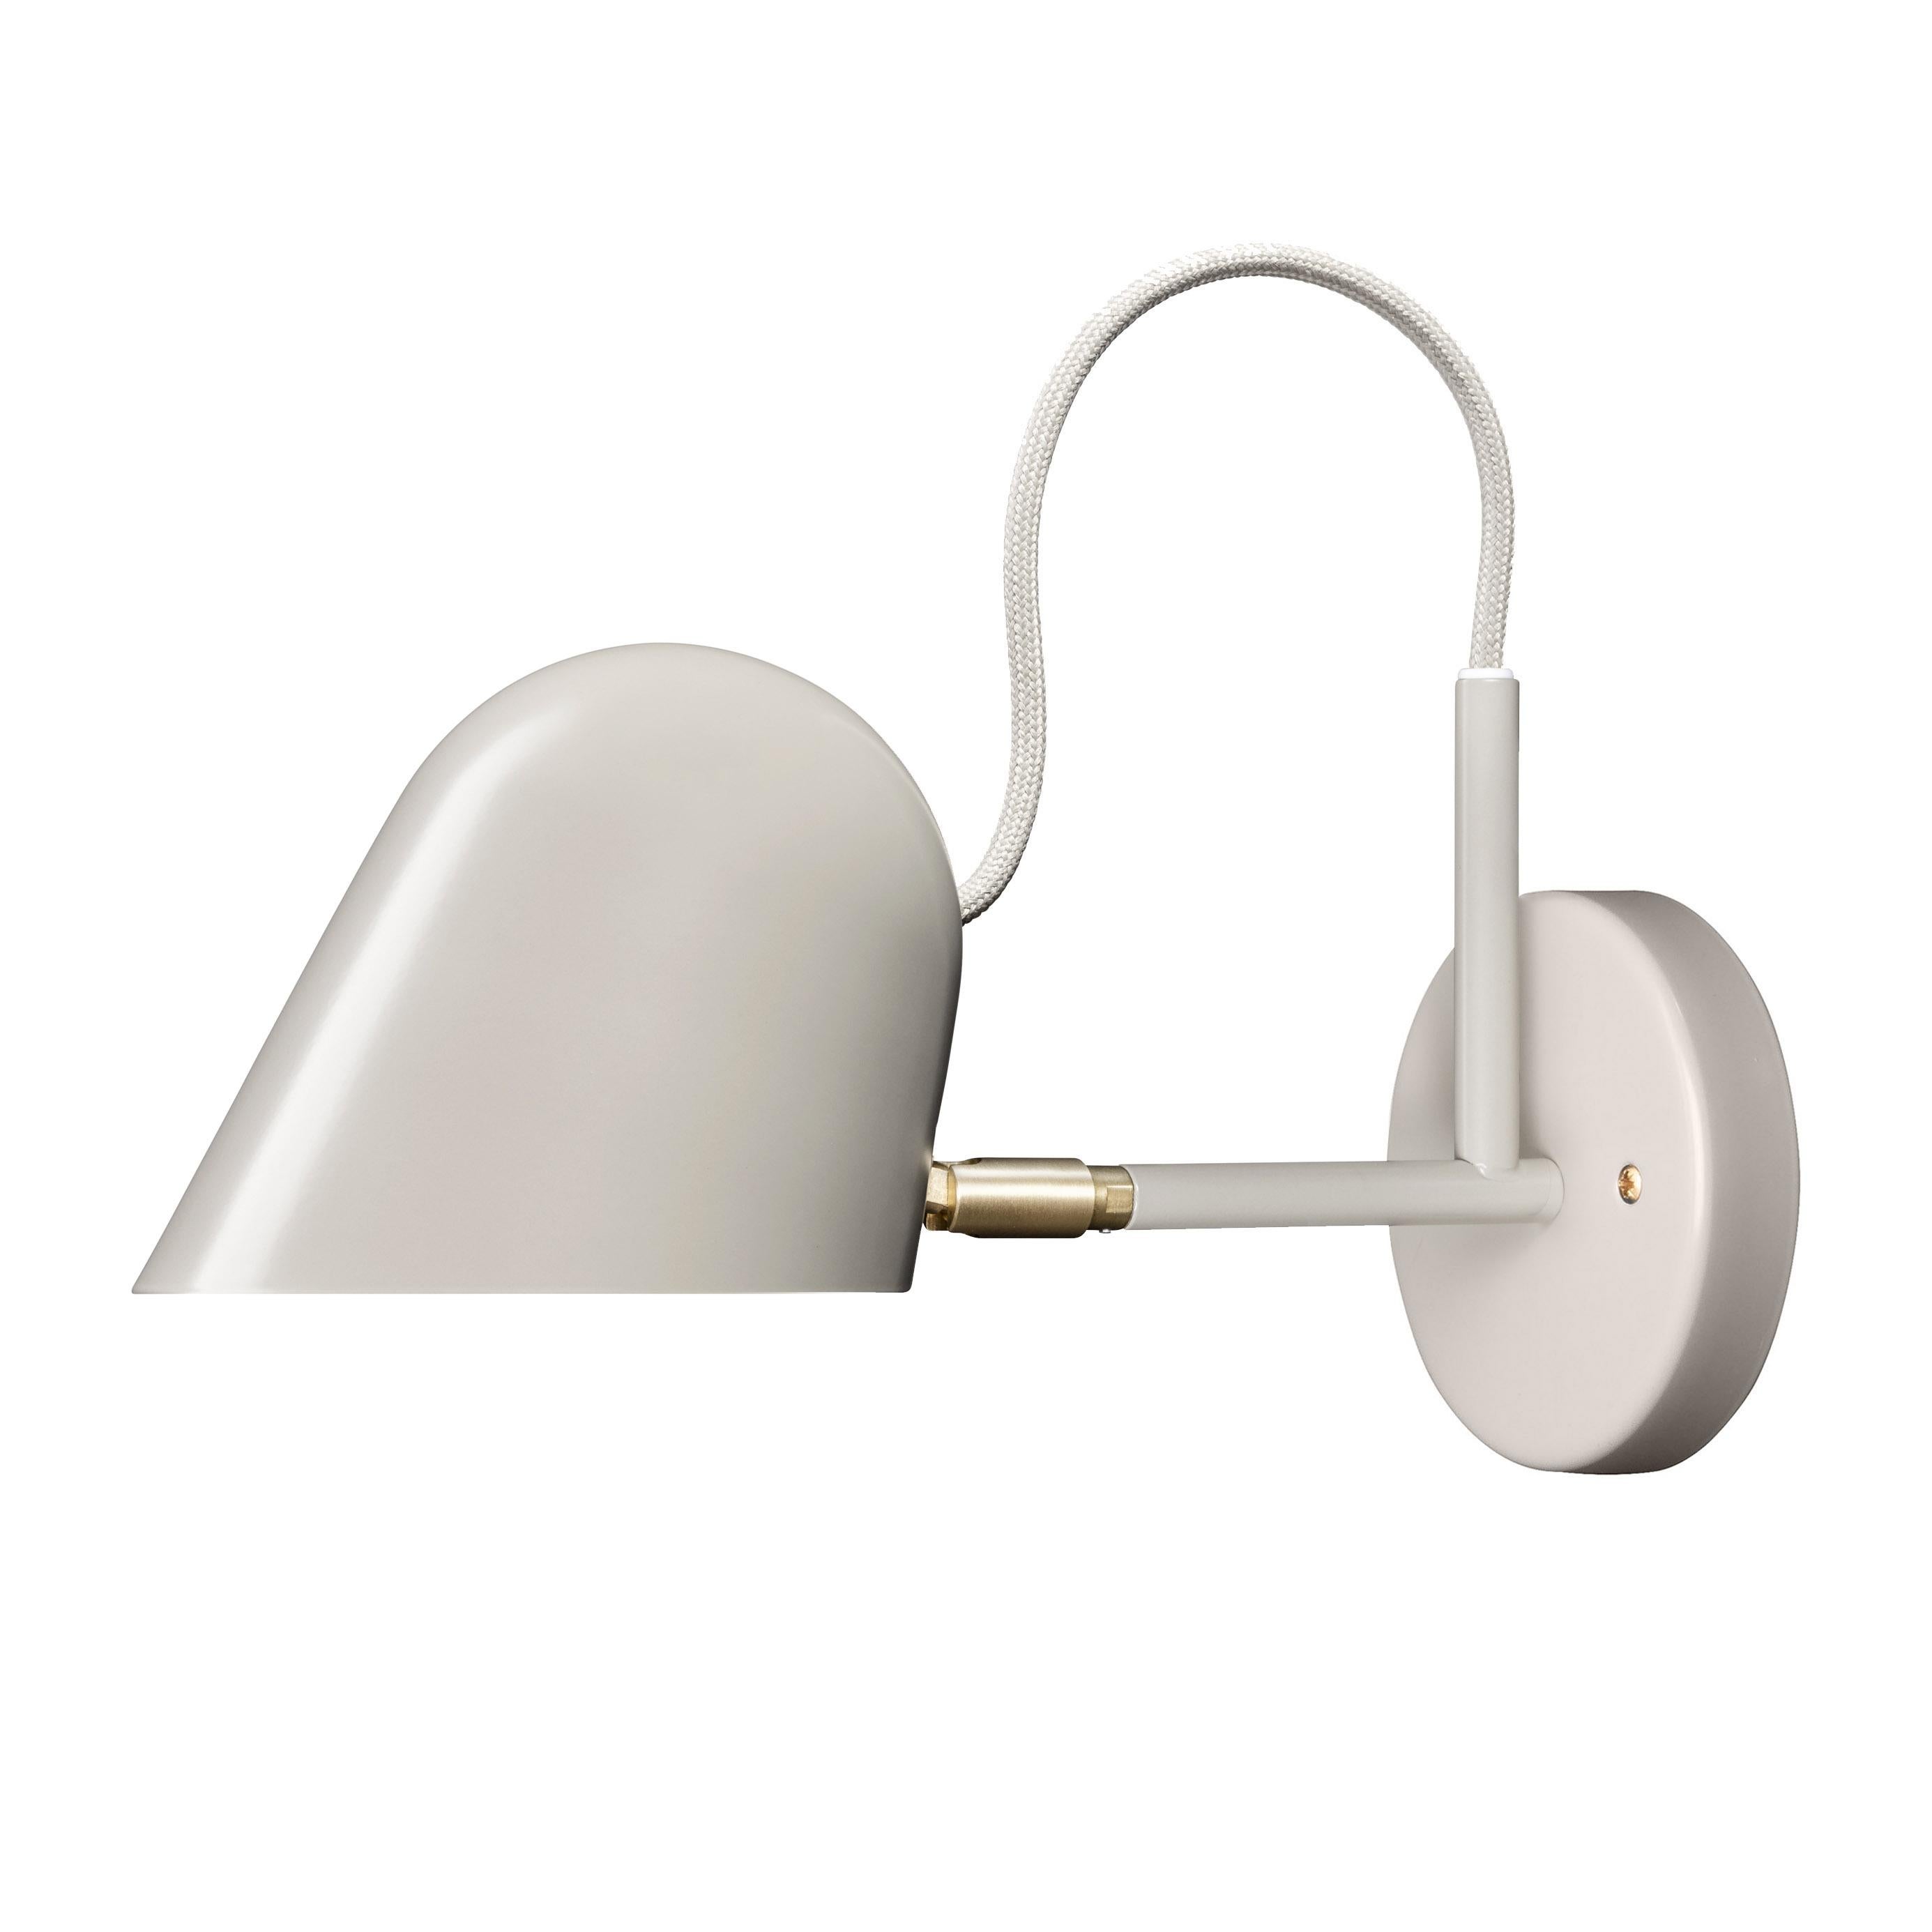 'Streck' Wall Light by Joel Karlsson for Örsjö in White In New Condition For Sale In Glendale, CA